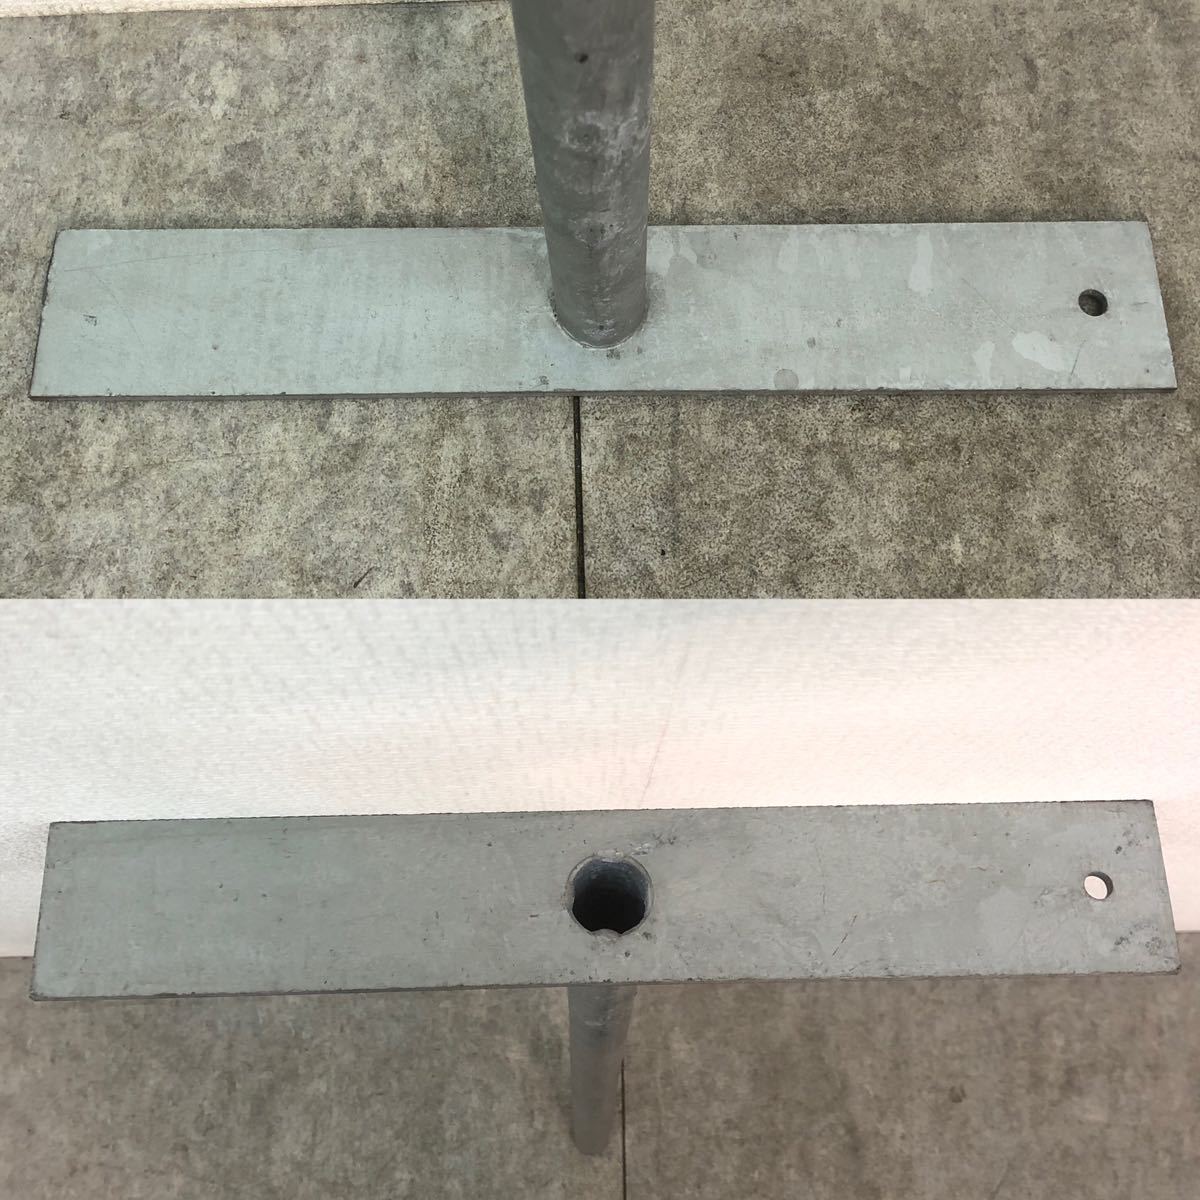 * american fence stand 1 point legs 1 pcs independent stand parts parts DIY size approximately 40×6.5×89.5cm diameter approximately 3cm legs only *23101808